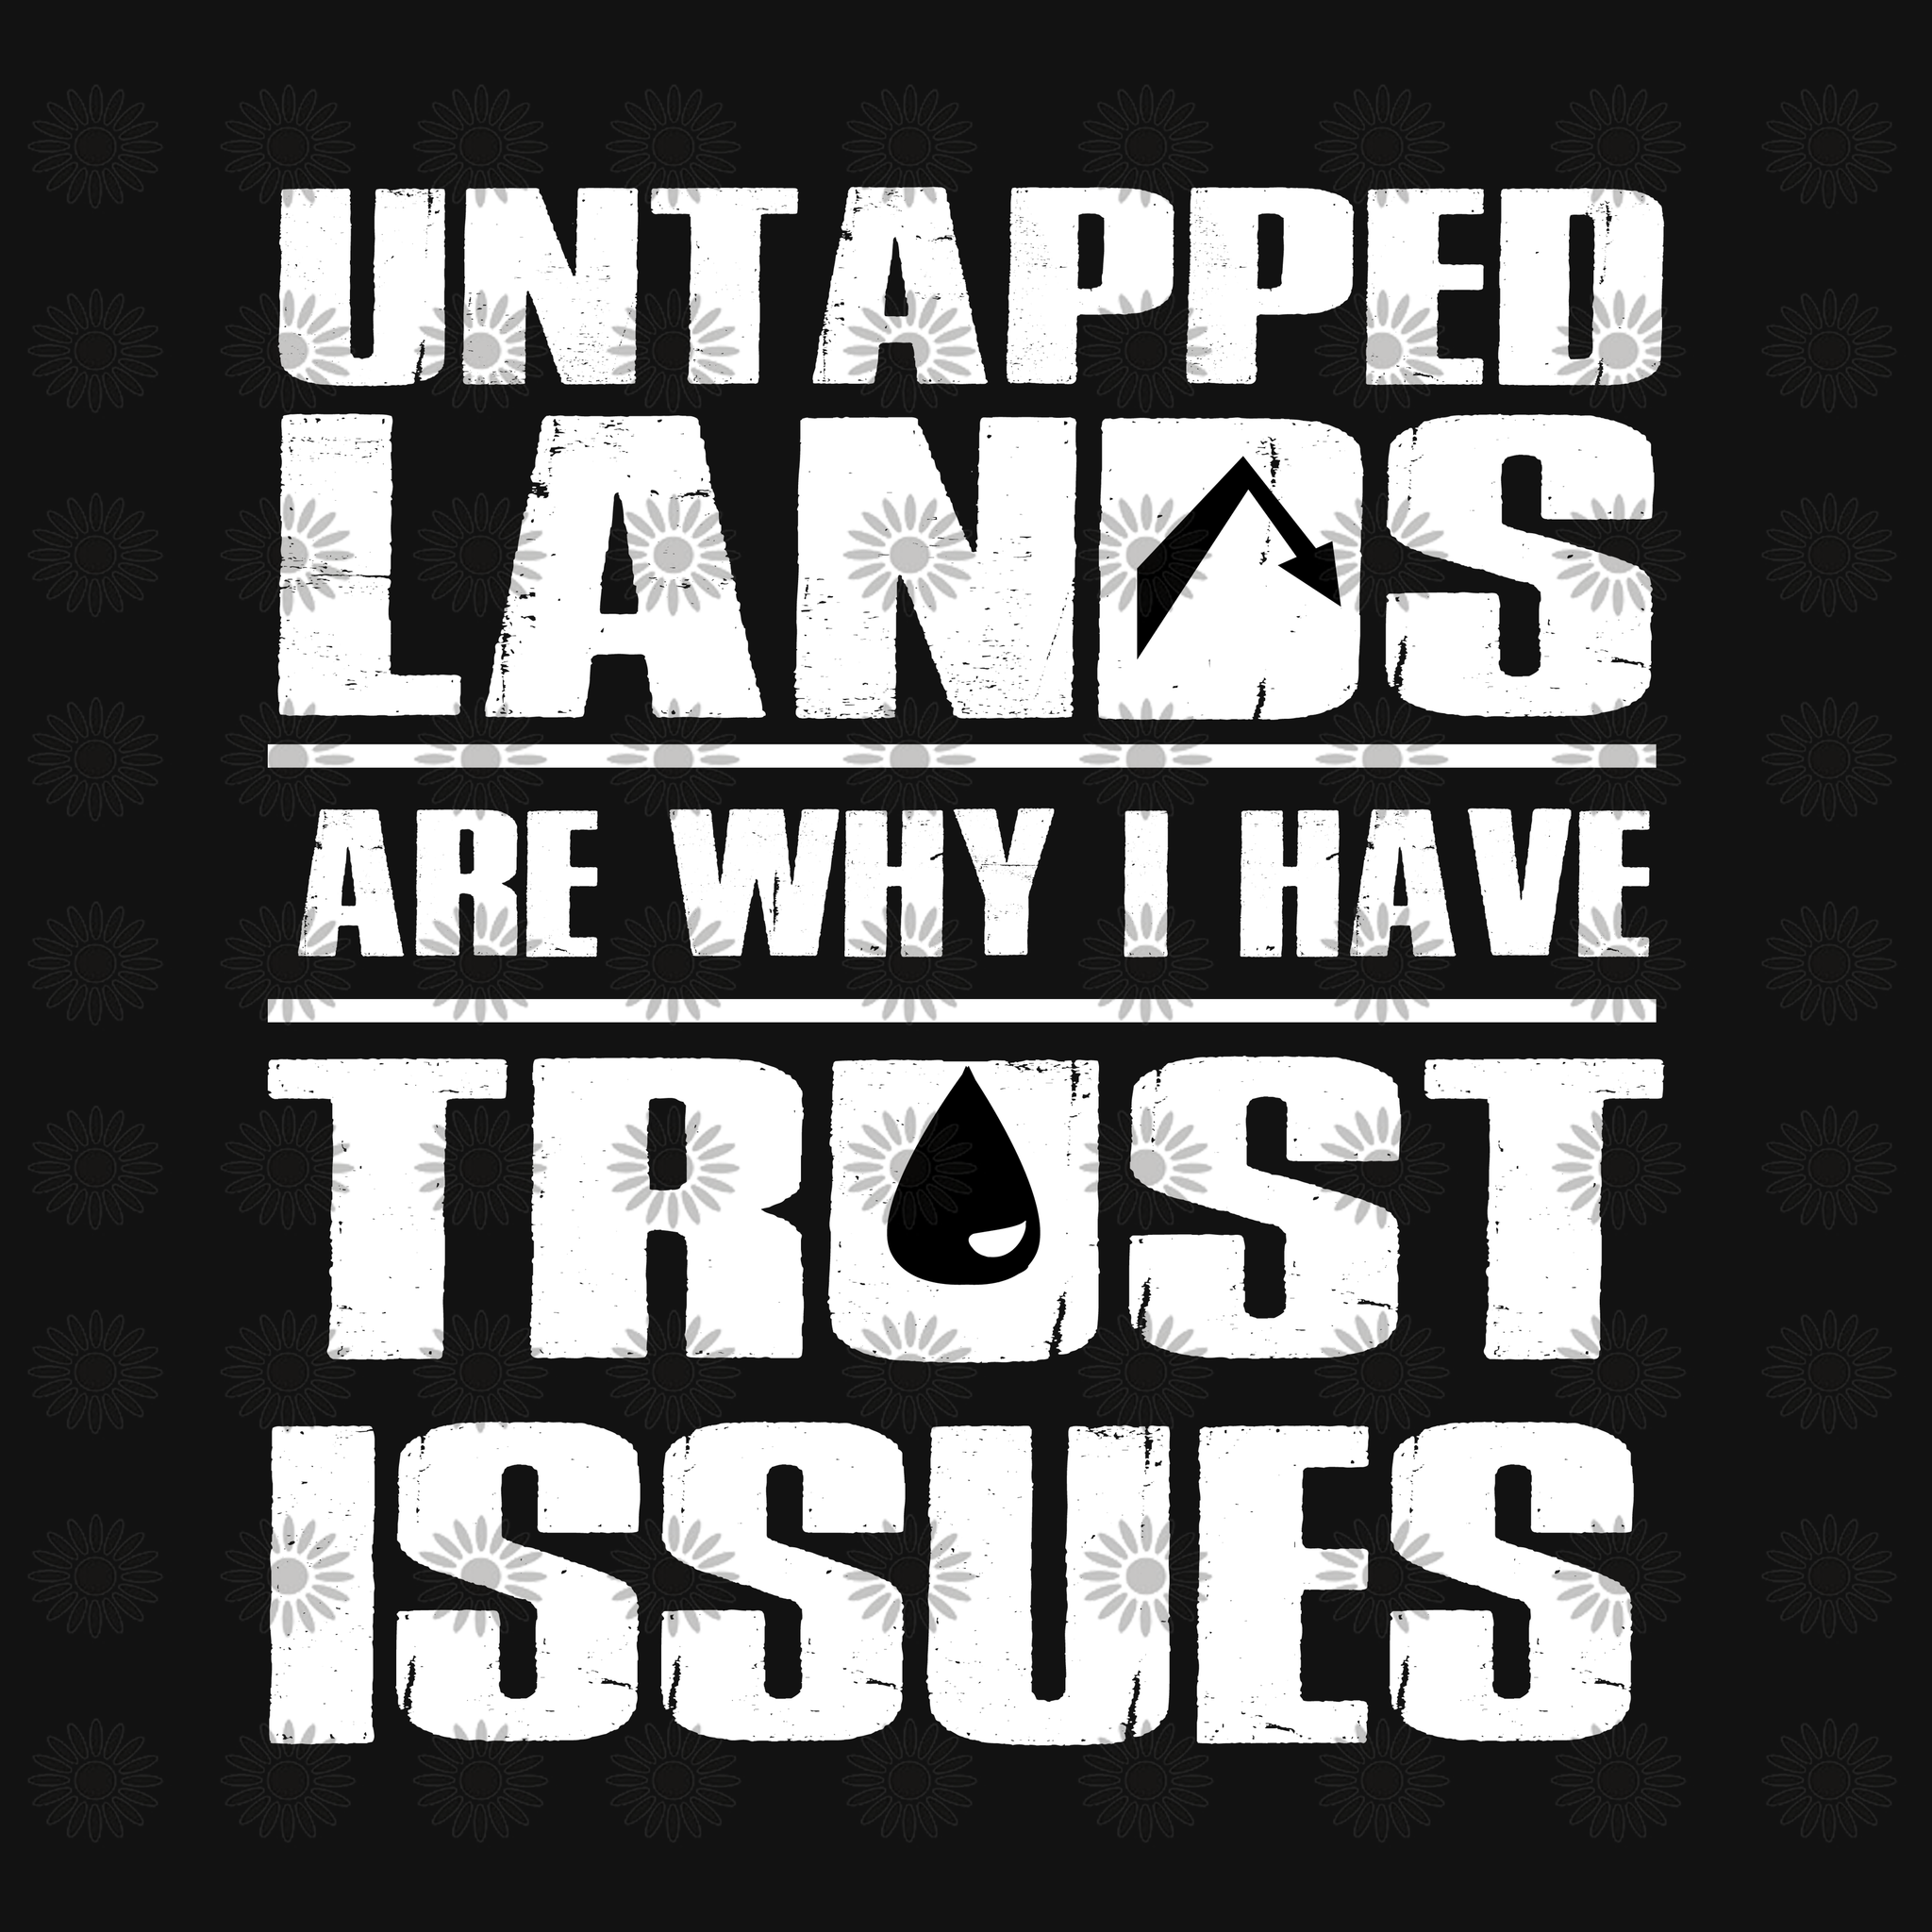 Untapped lands are why i have trust issues svg, Untapped lands are why i have trust issues, funny quotes svg, eps, dxf, png file